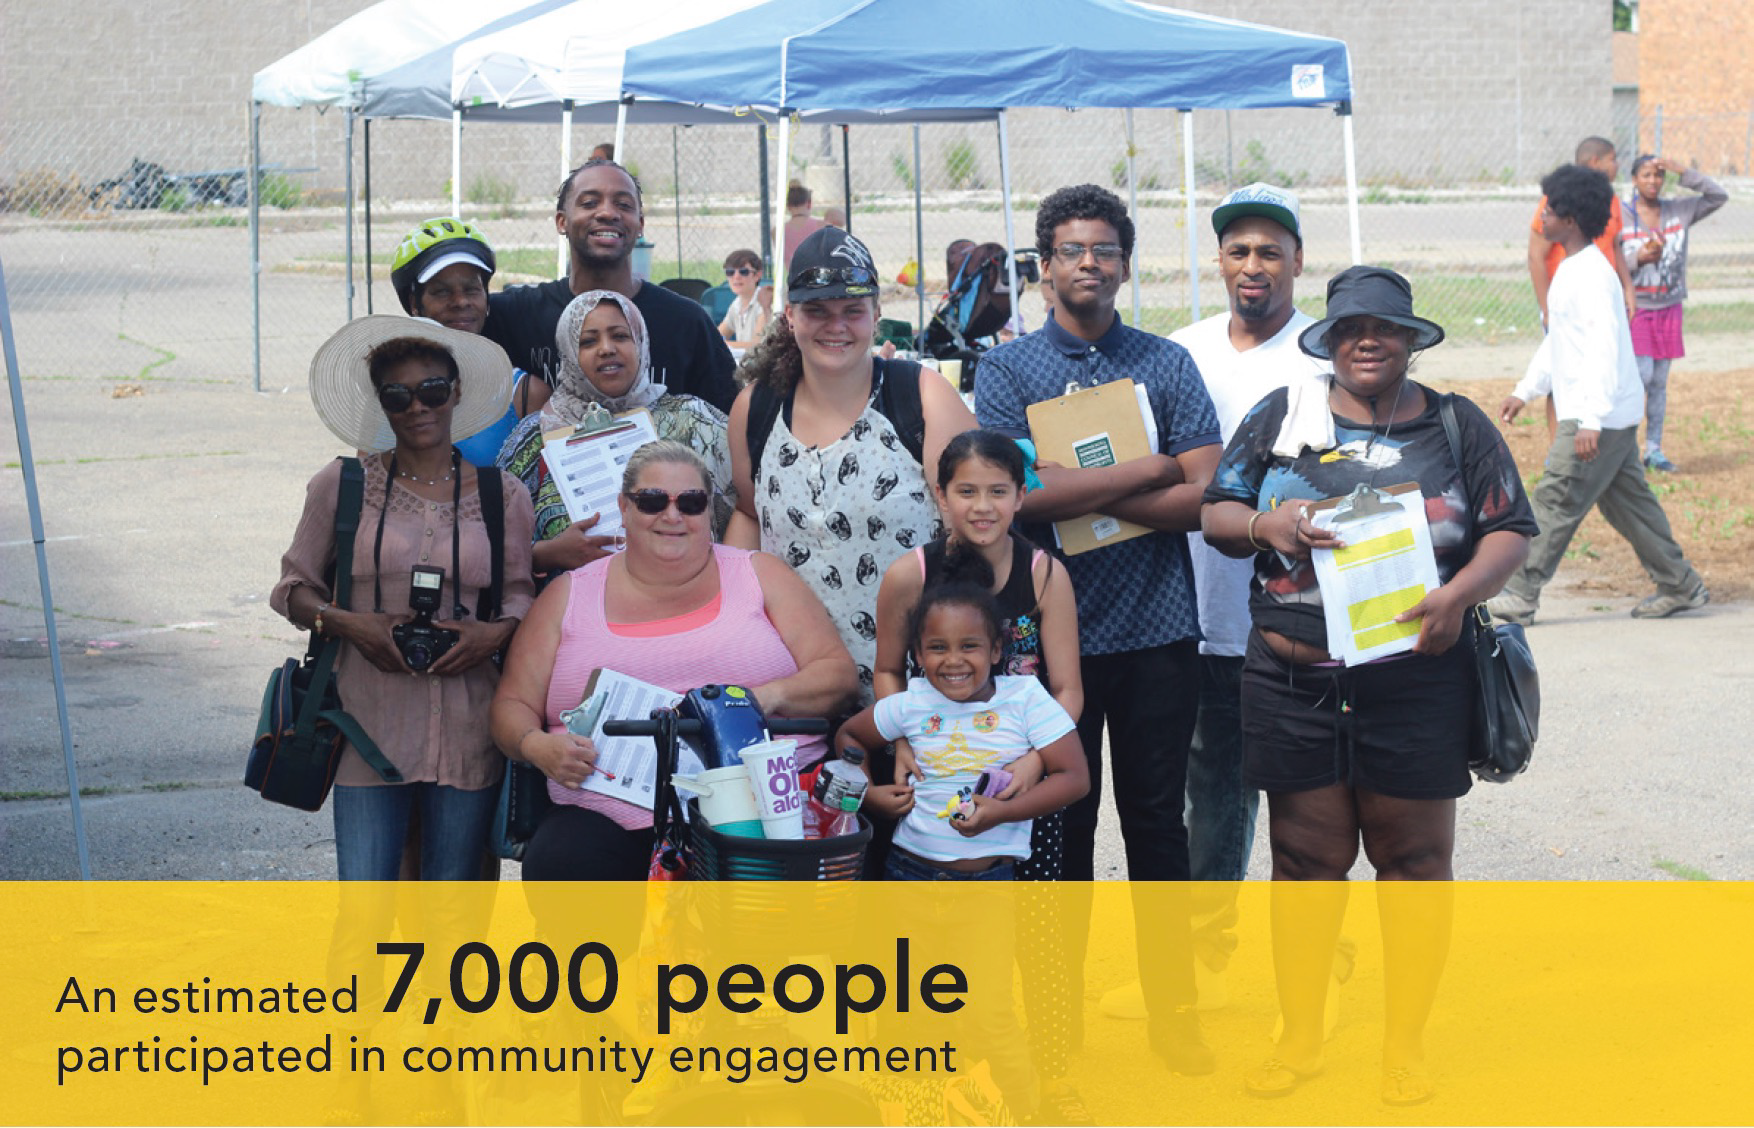 An estimated 7,000 people participated in community engagement.